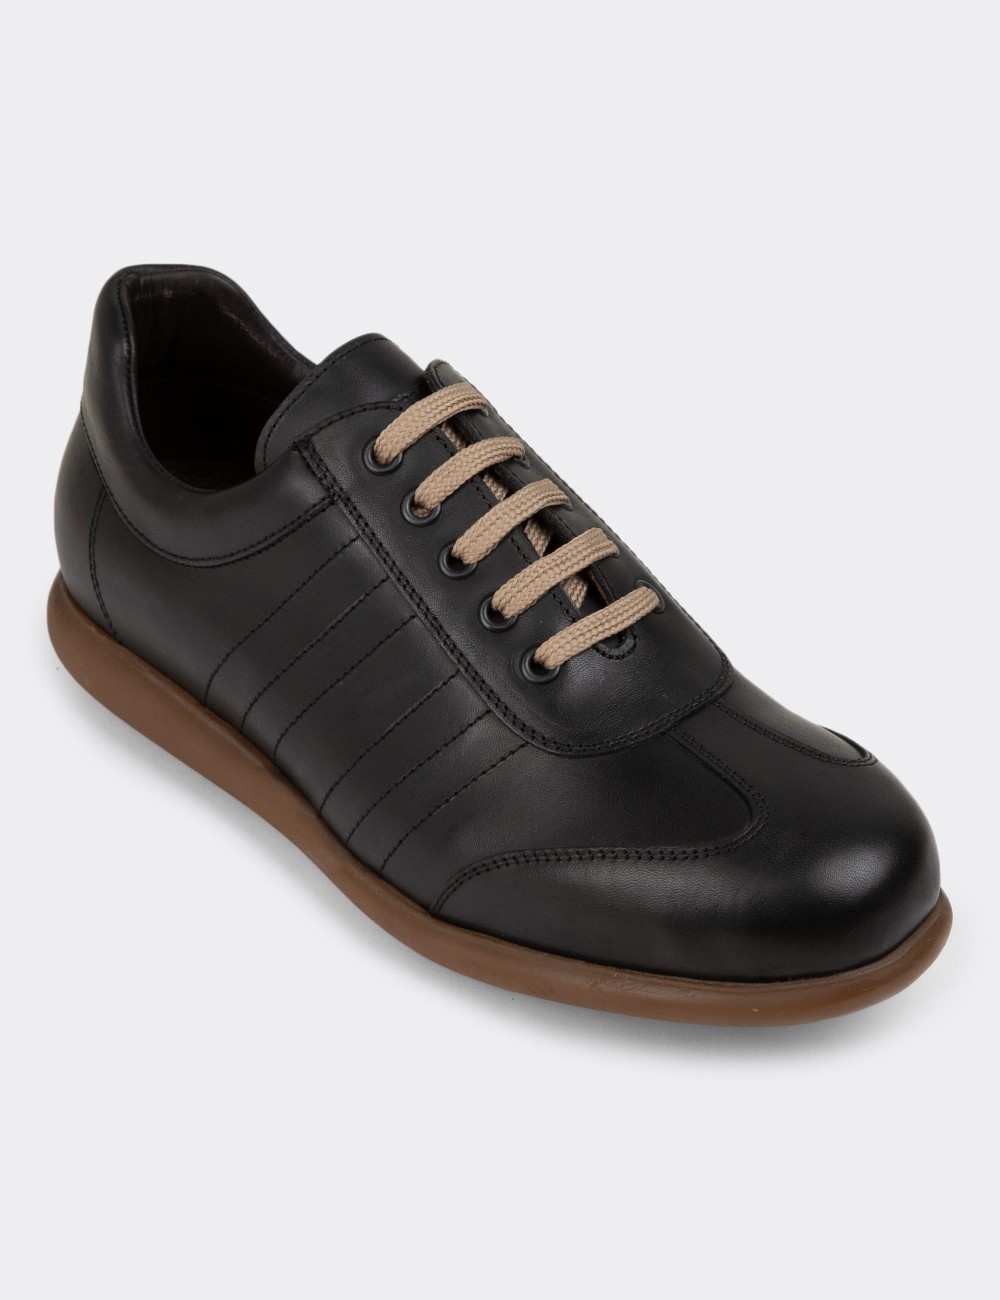 Black Leather Lace-up Shoes - 01826MSYHC06